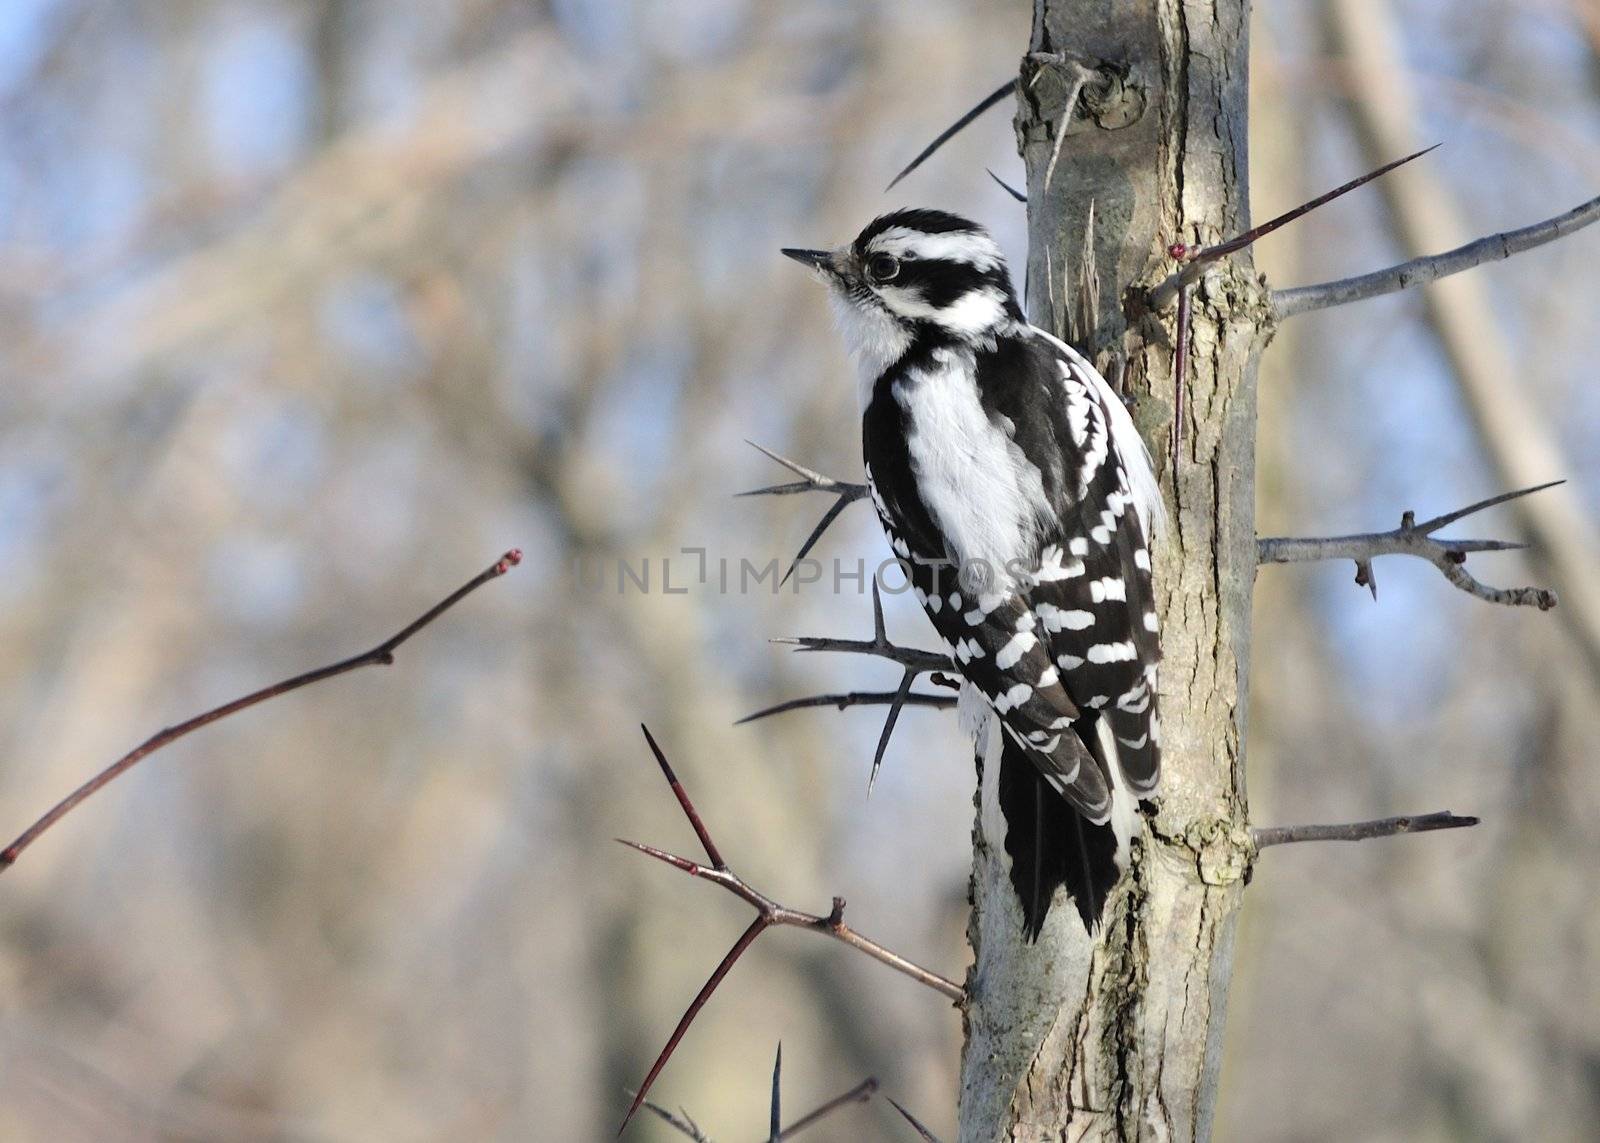 A female downy woodpecker perched on a tree branch.